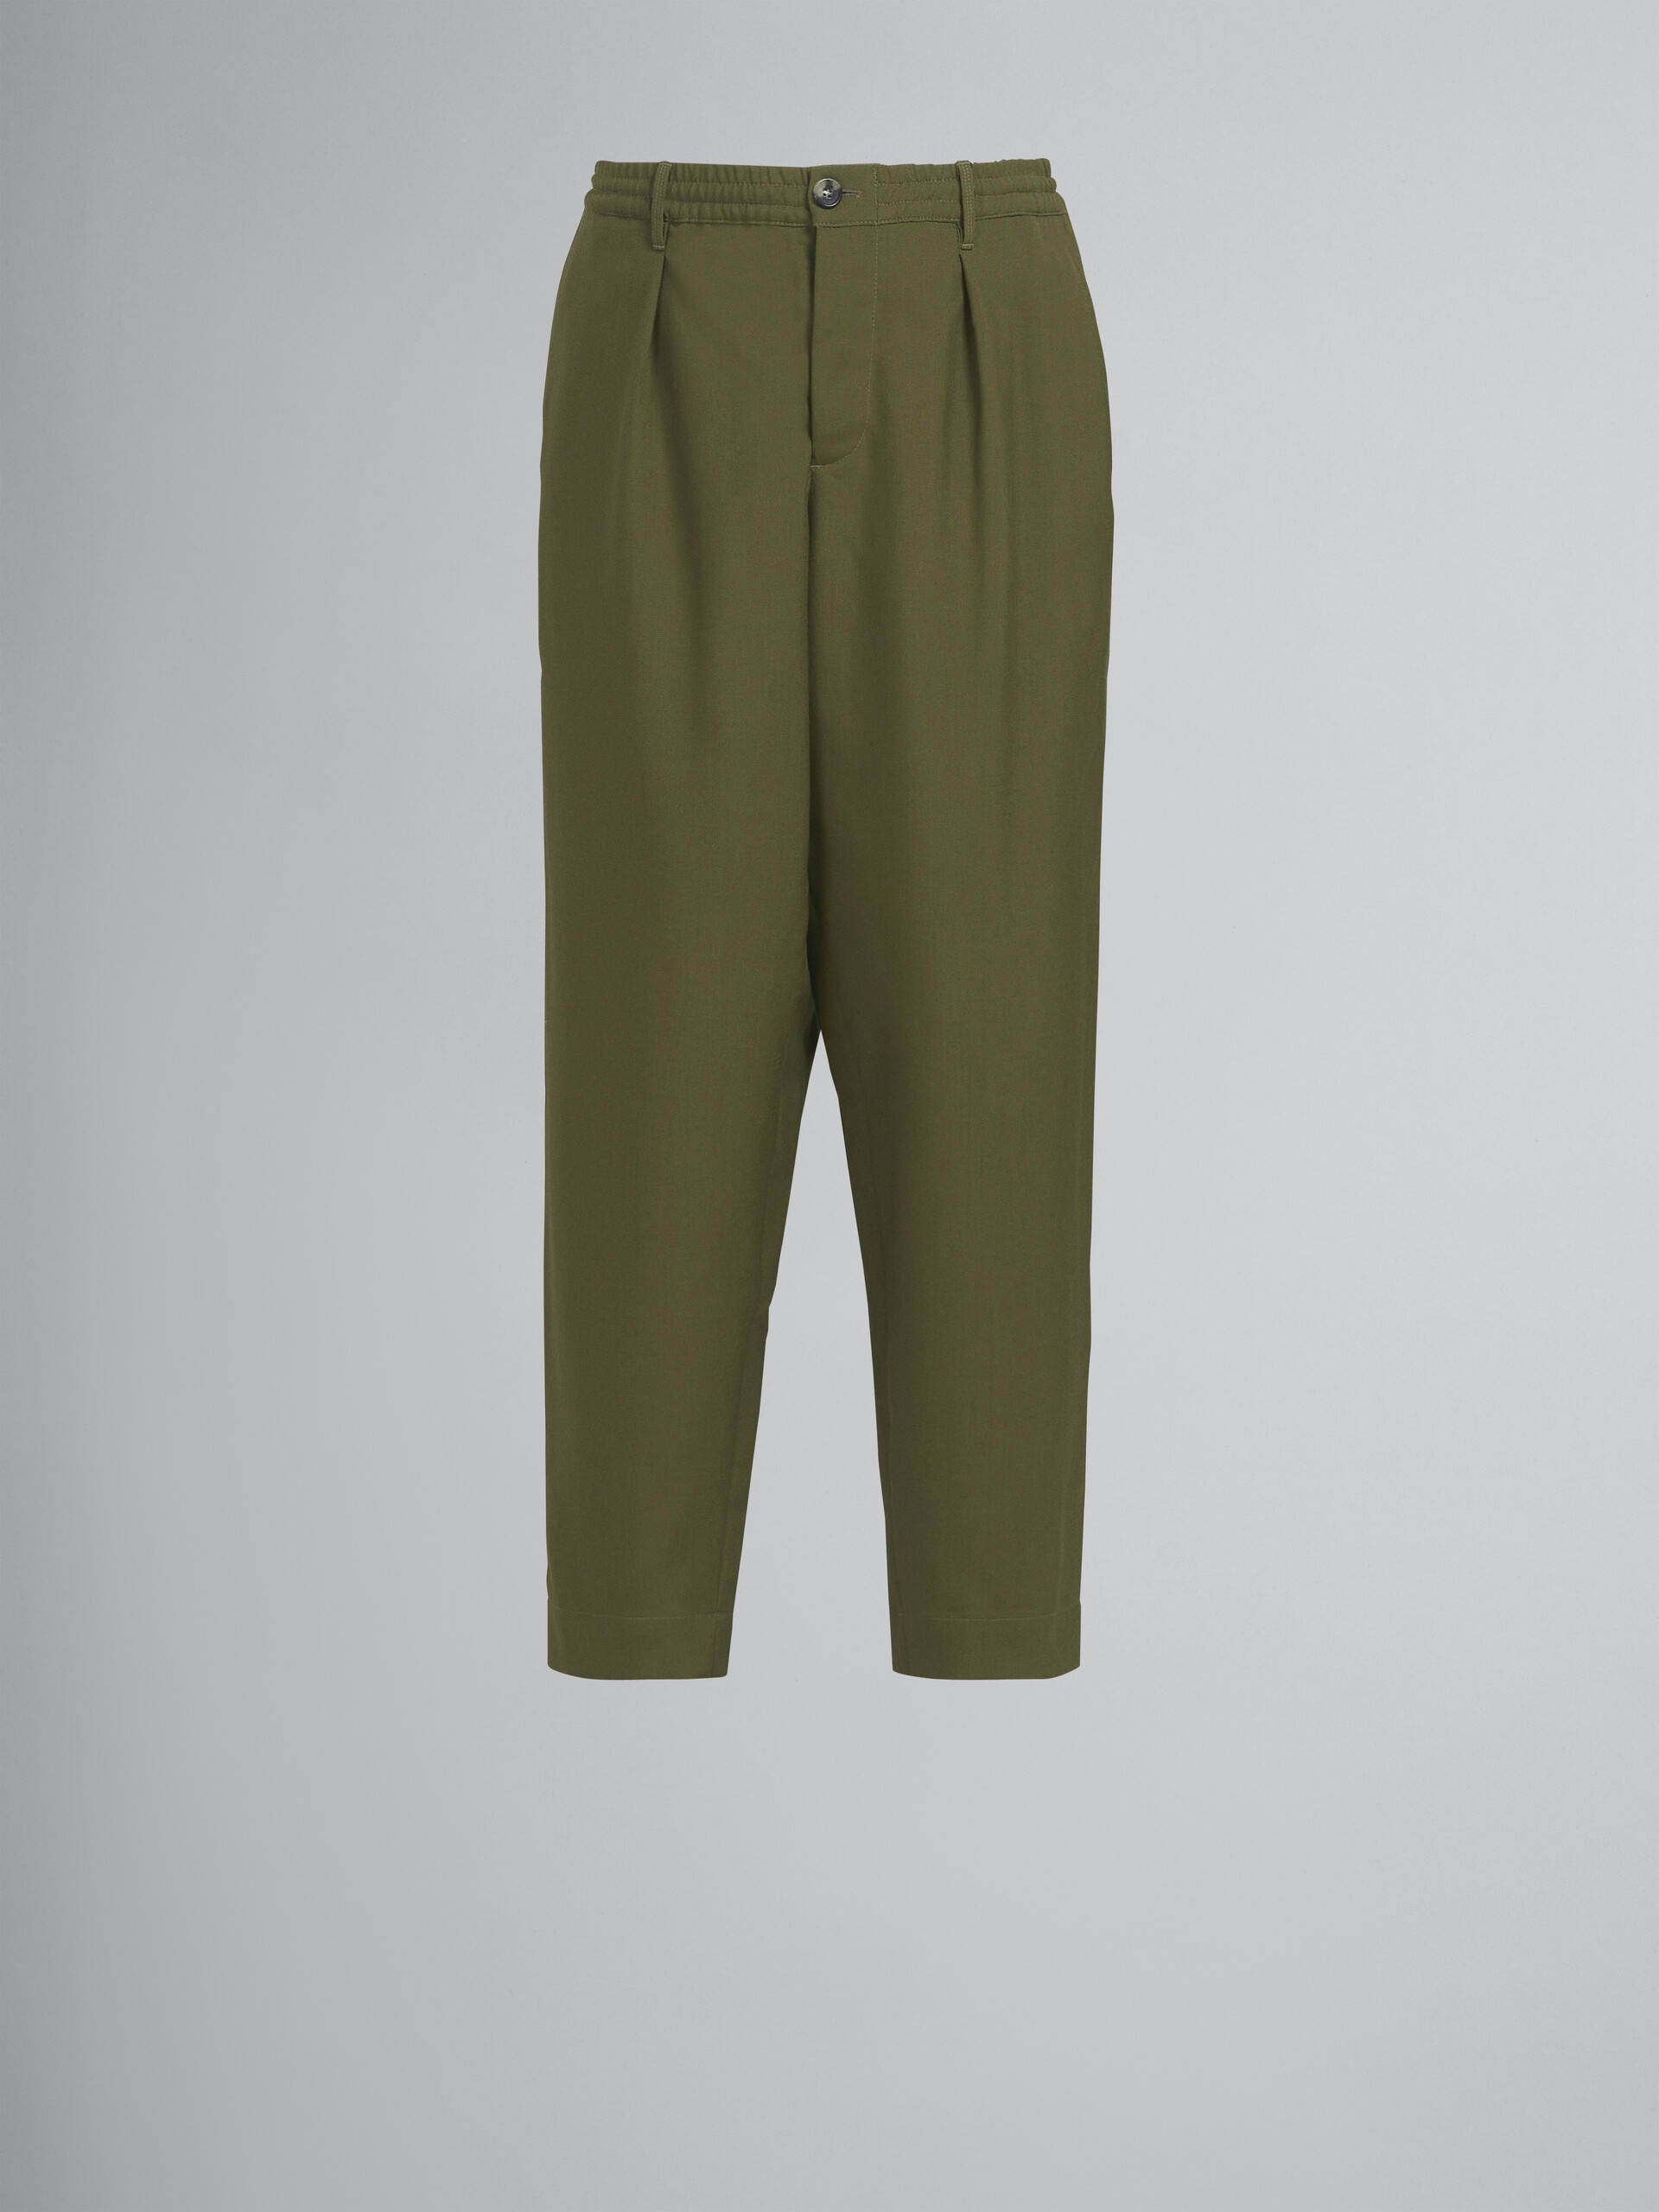 Green tropical wool cropped trousers - Pants - Image 1